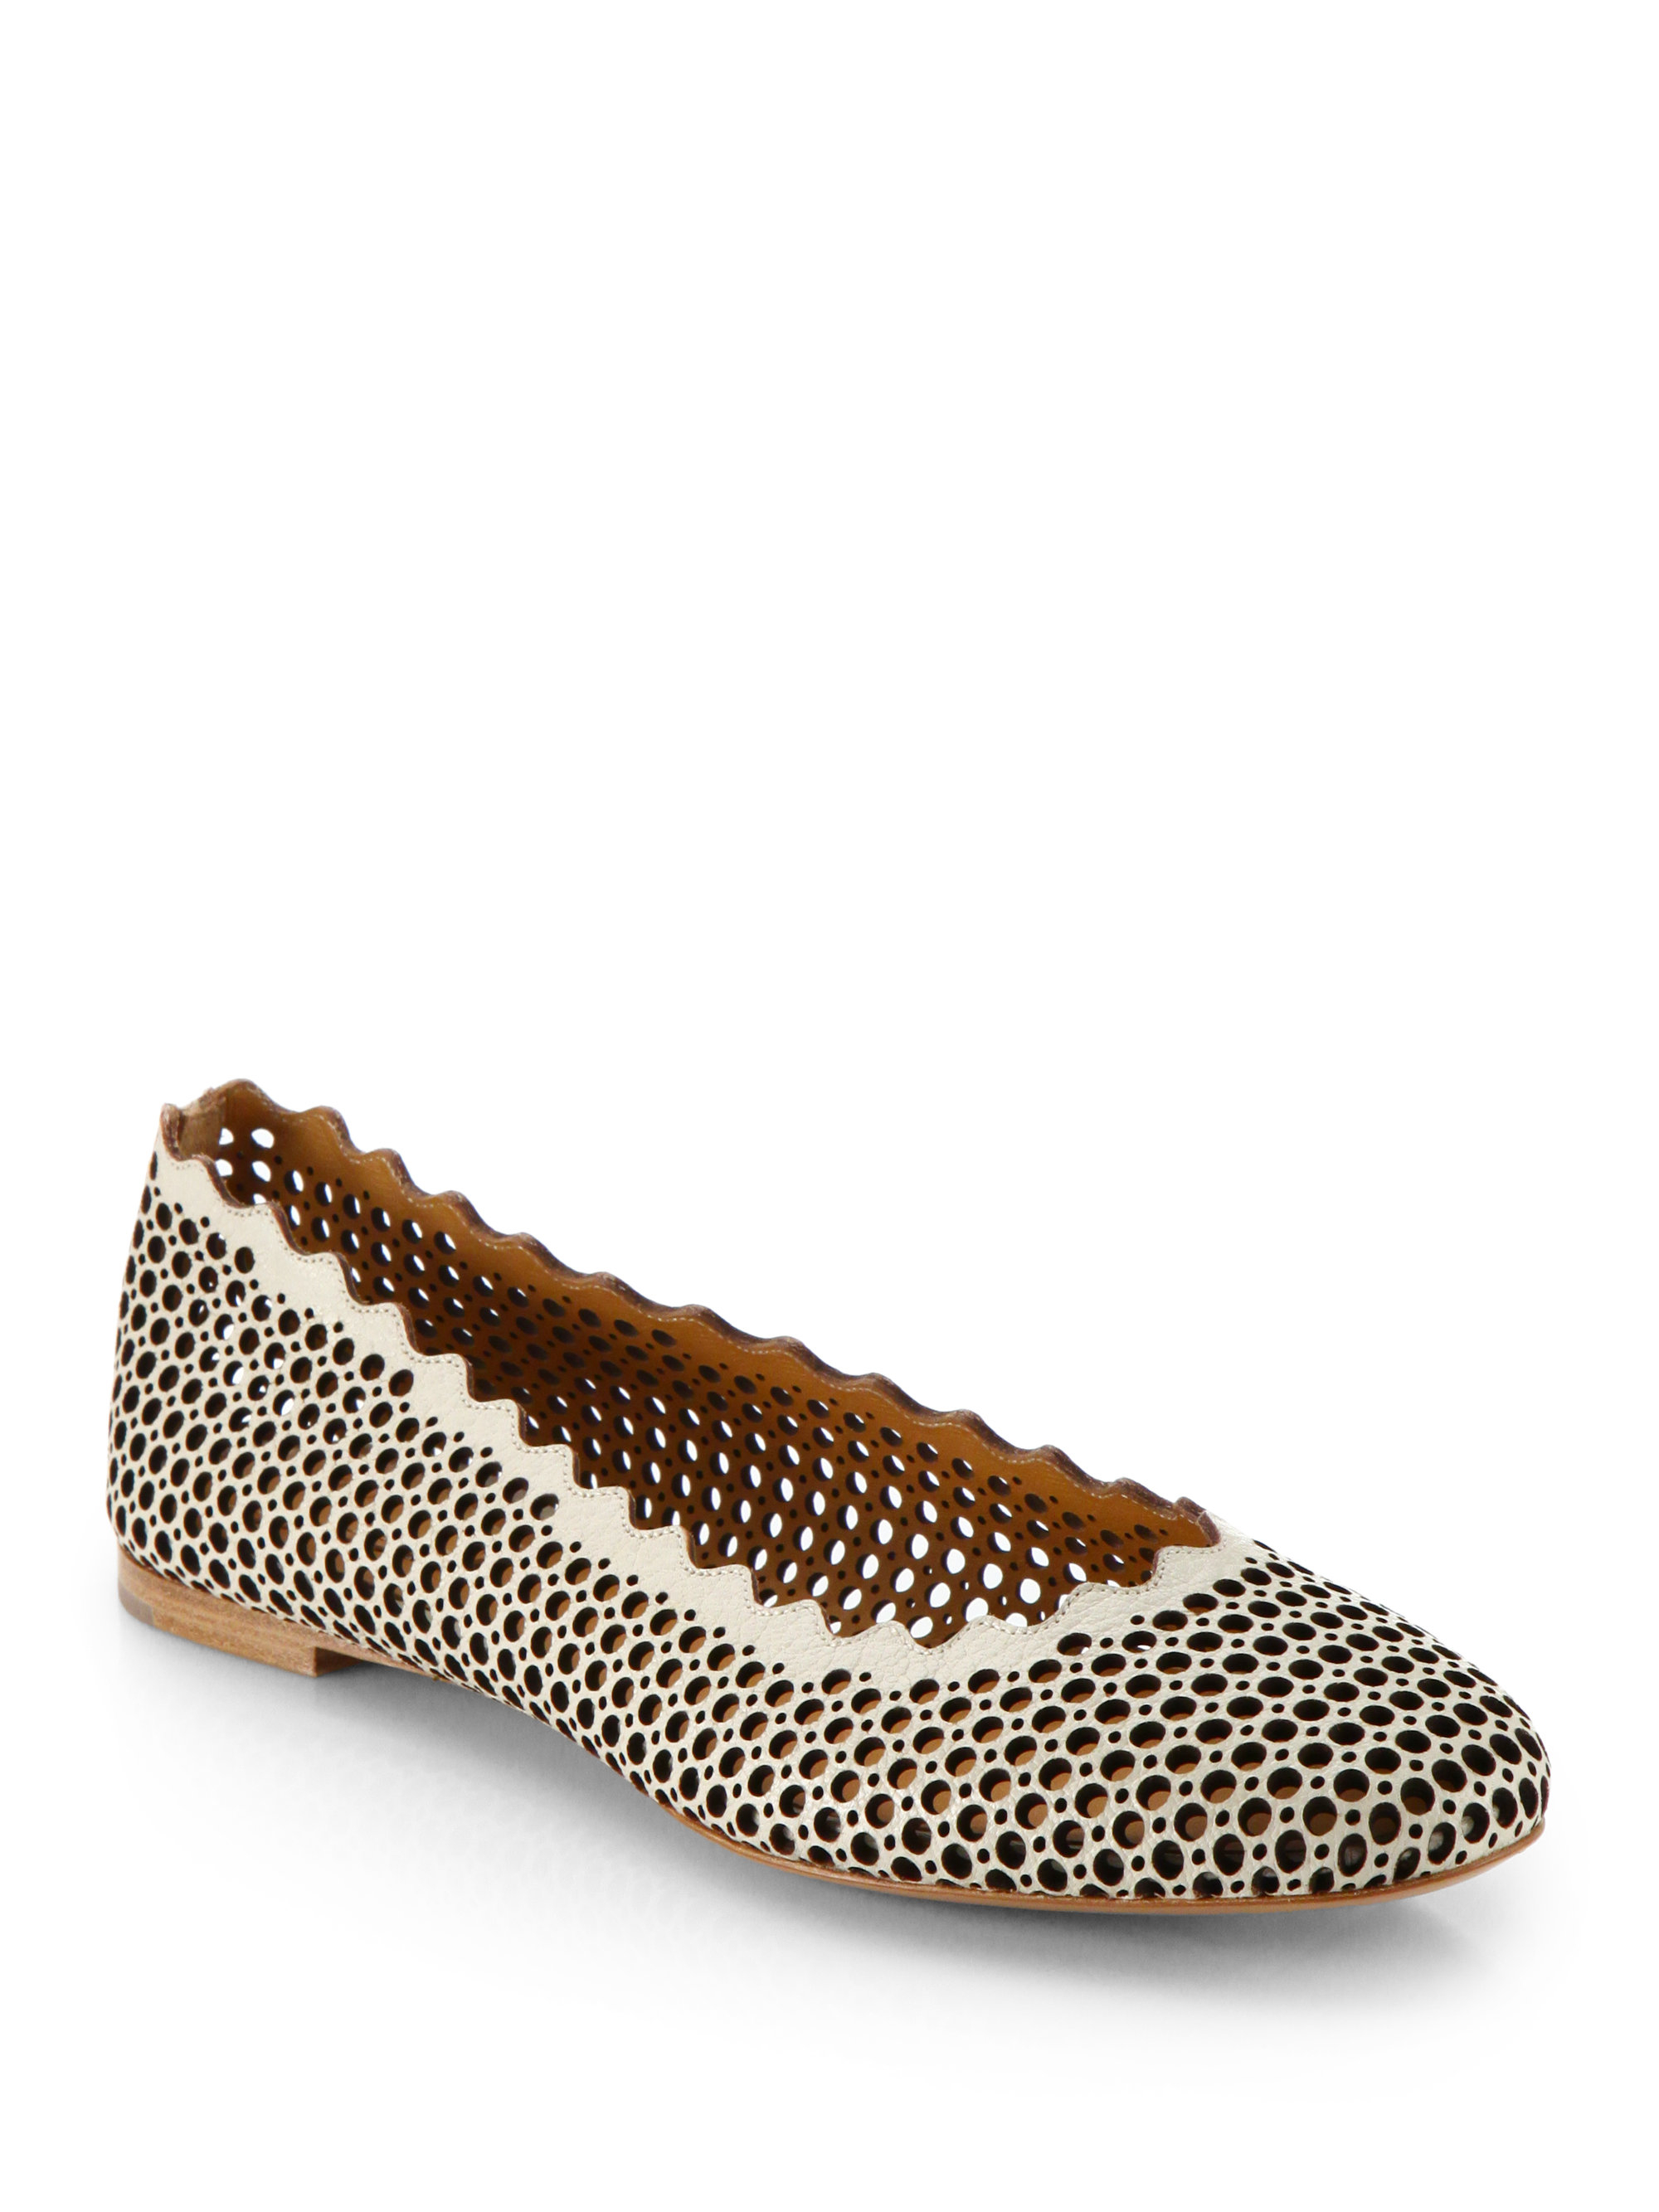 Chloé Perforated Leather Ballet Flats in Gray | Lyst